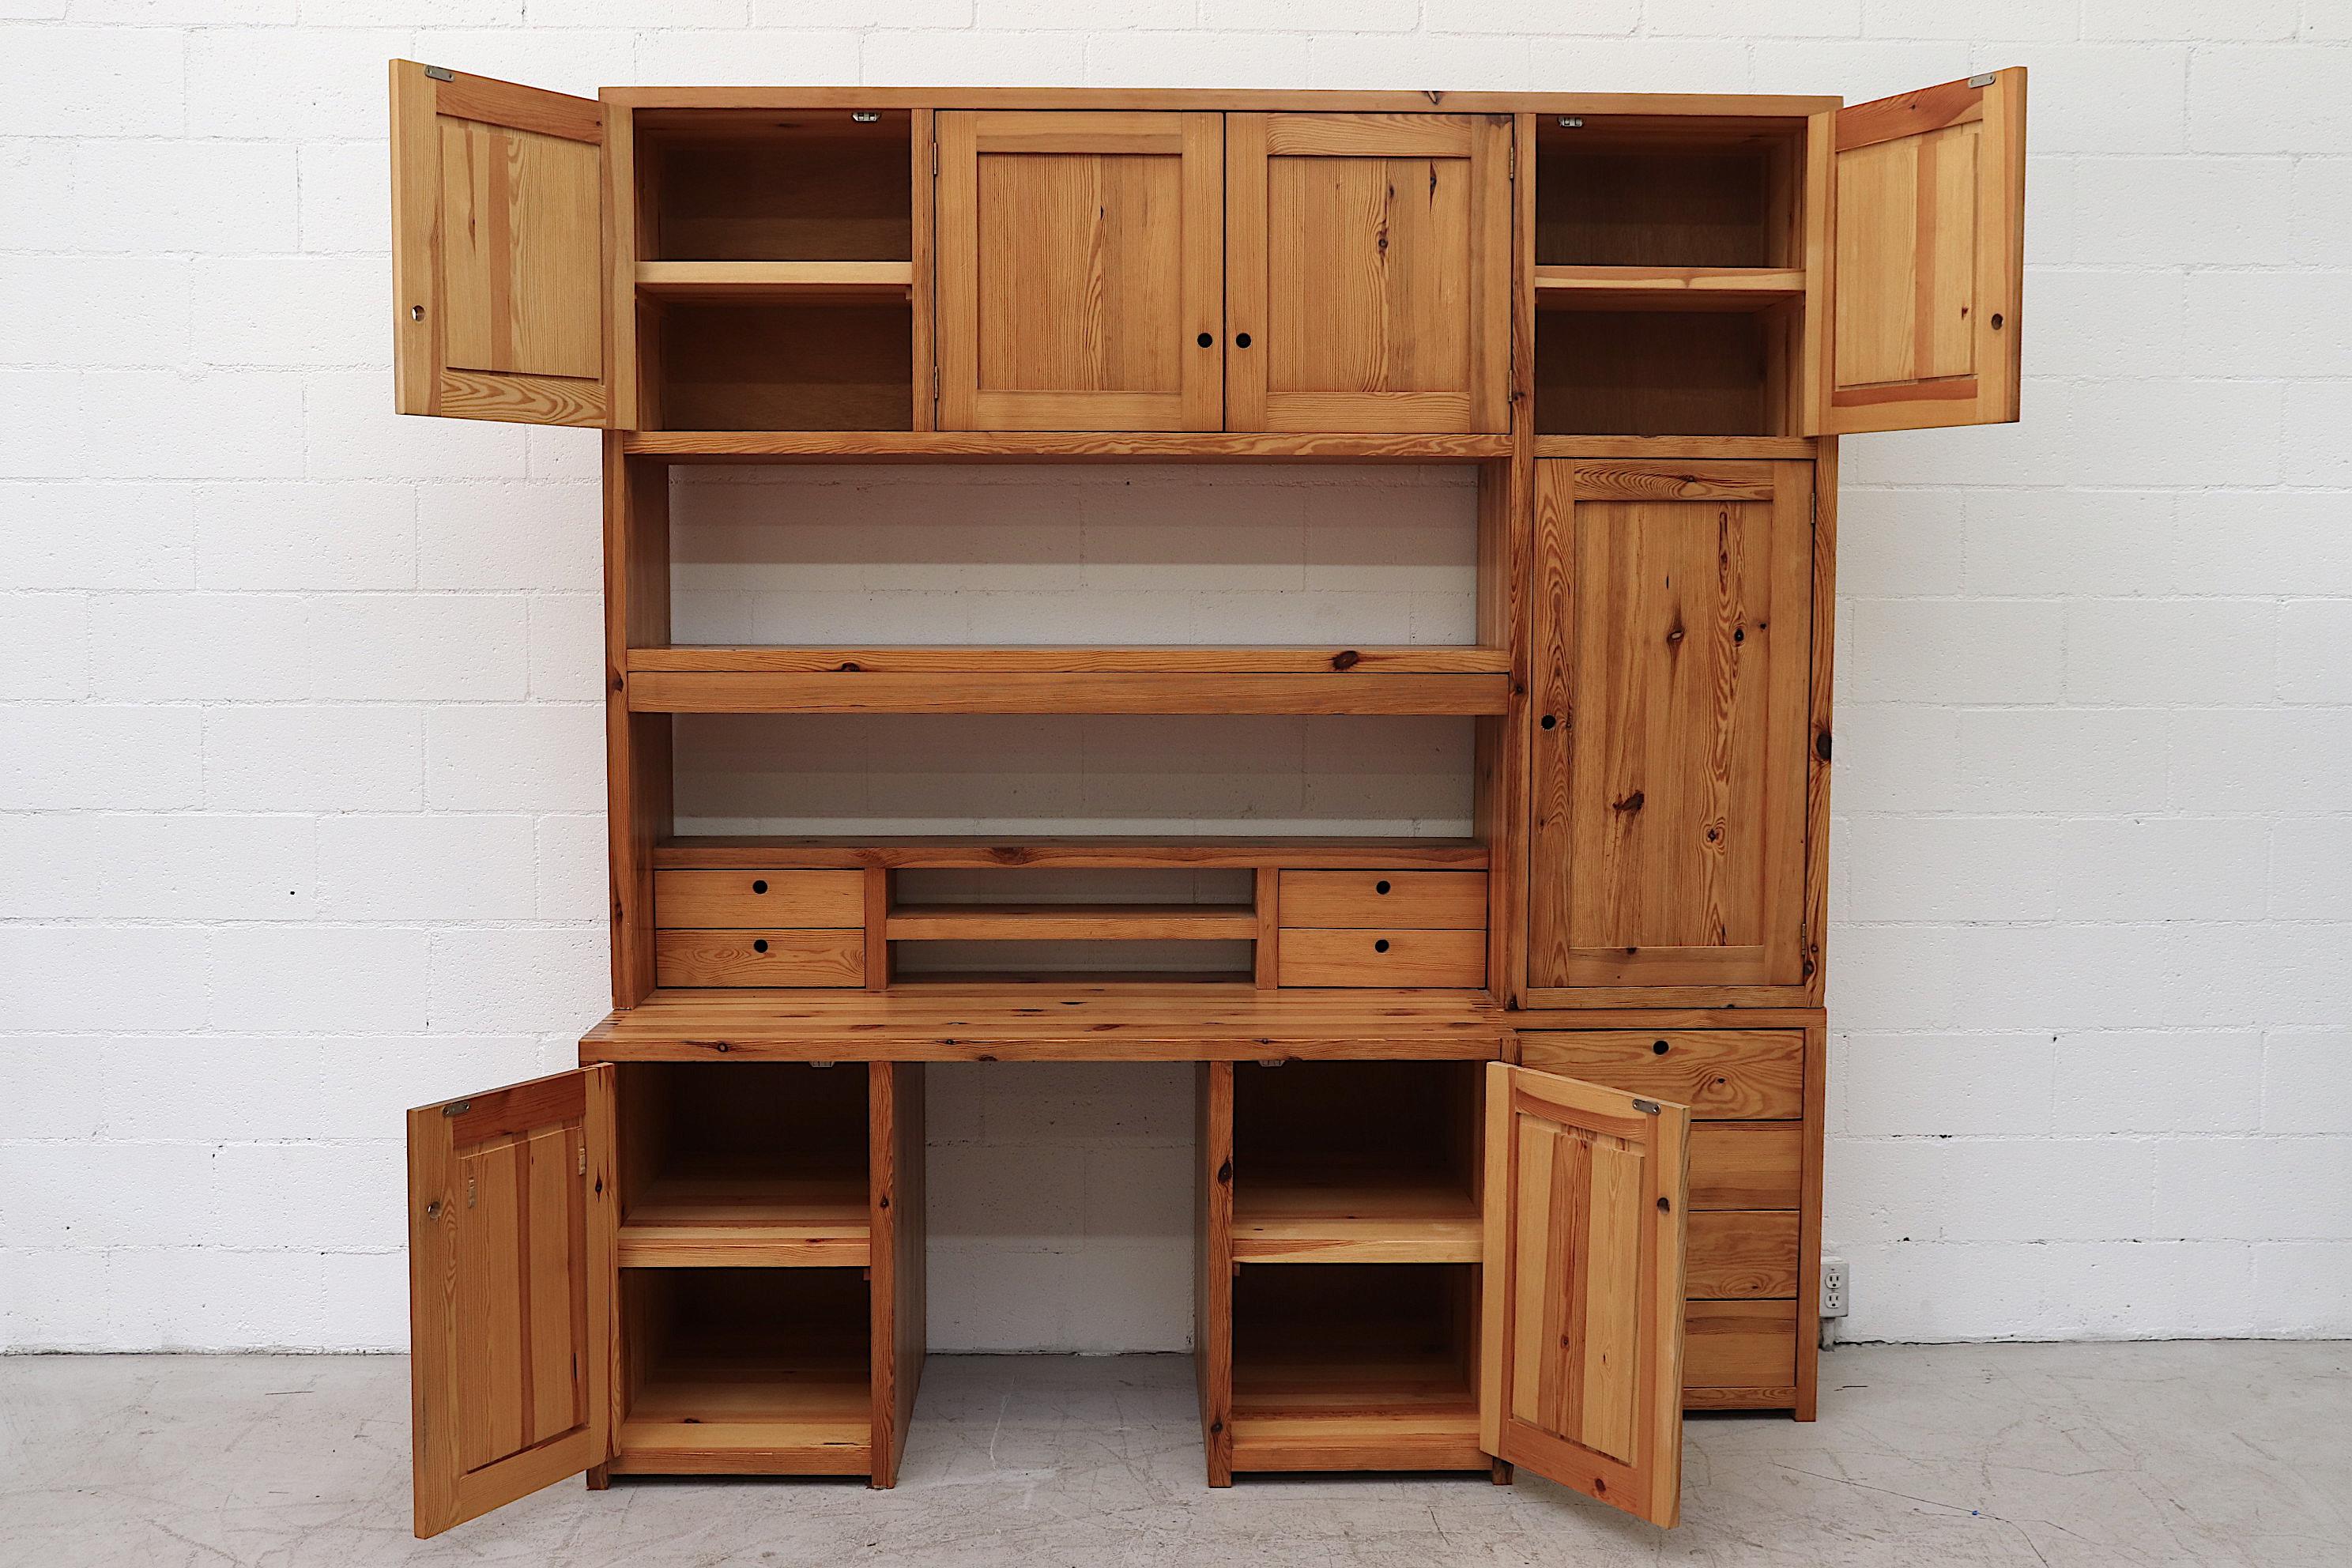 Custom designed extra large Ate Van Apeldoorn pine wall unit. Three individual pieces consisting of a lower desk with double storage cabinets, a small storage cabinet with four drawers, both topped with a large upper unit with plenty of overhead